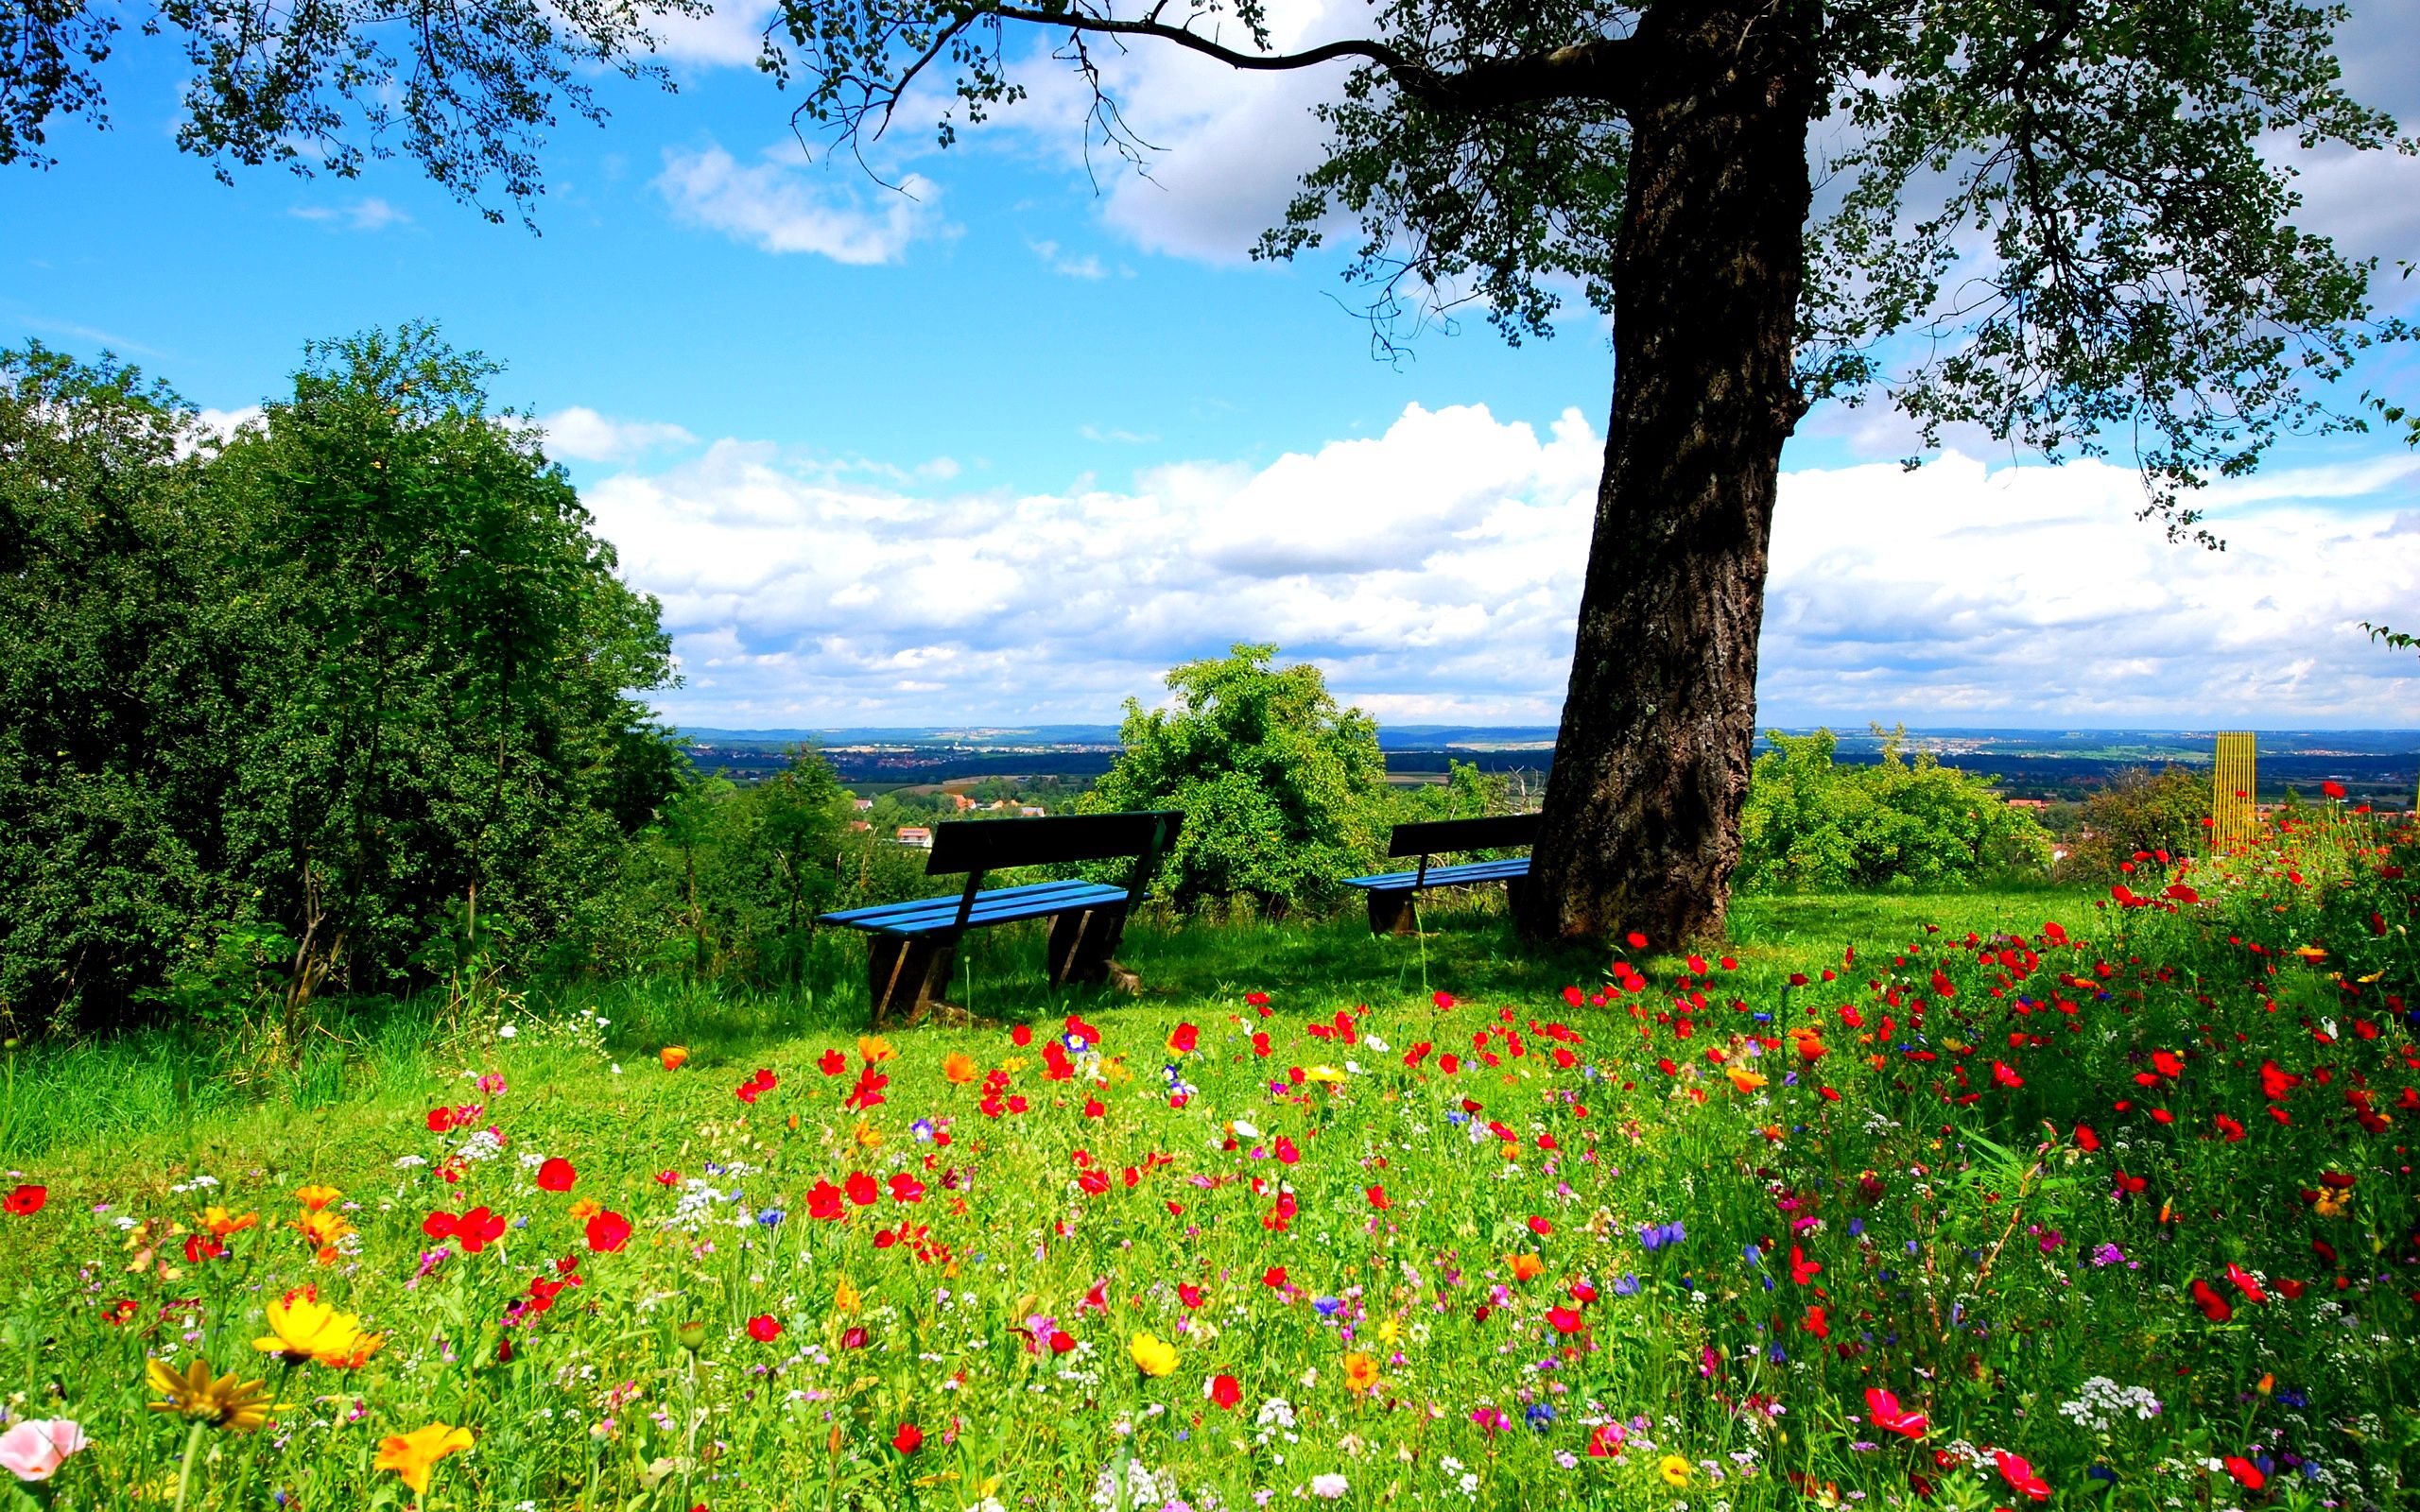 flowers, nature, trees, benches images